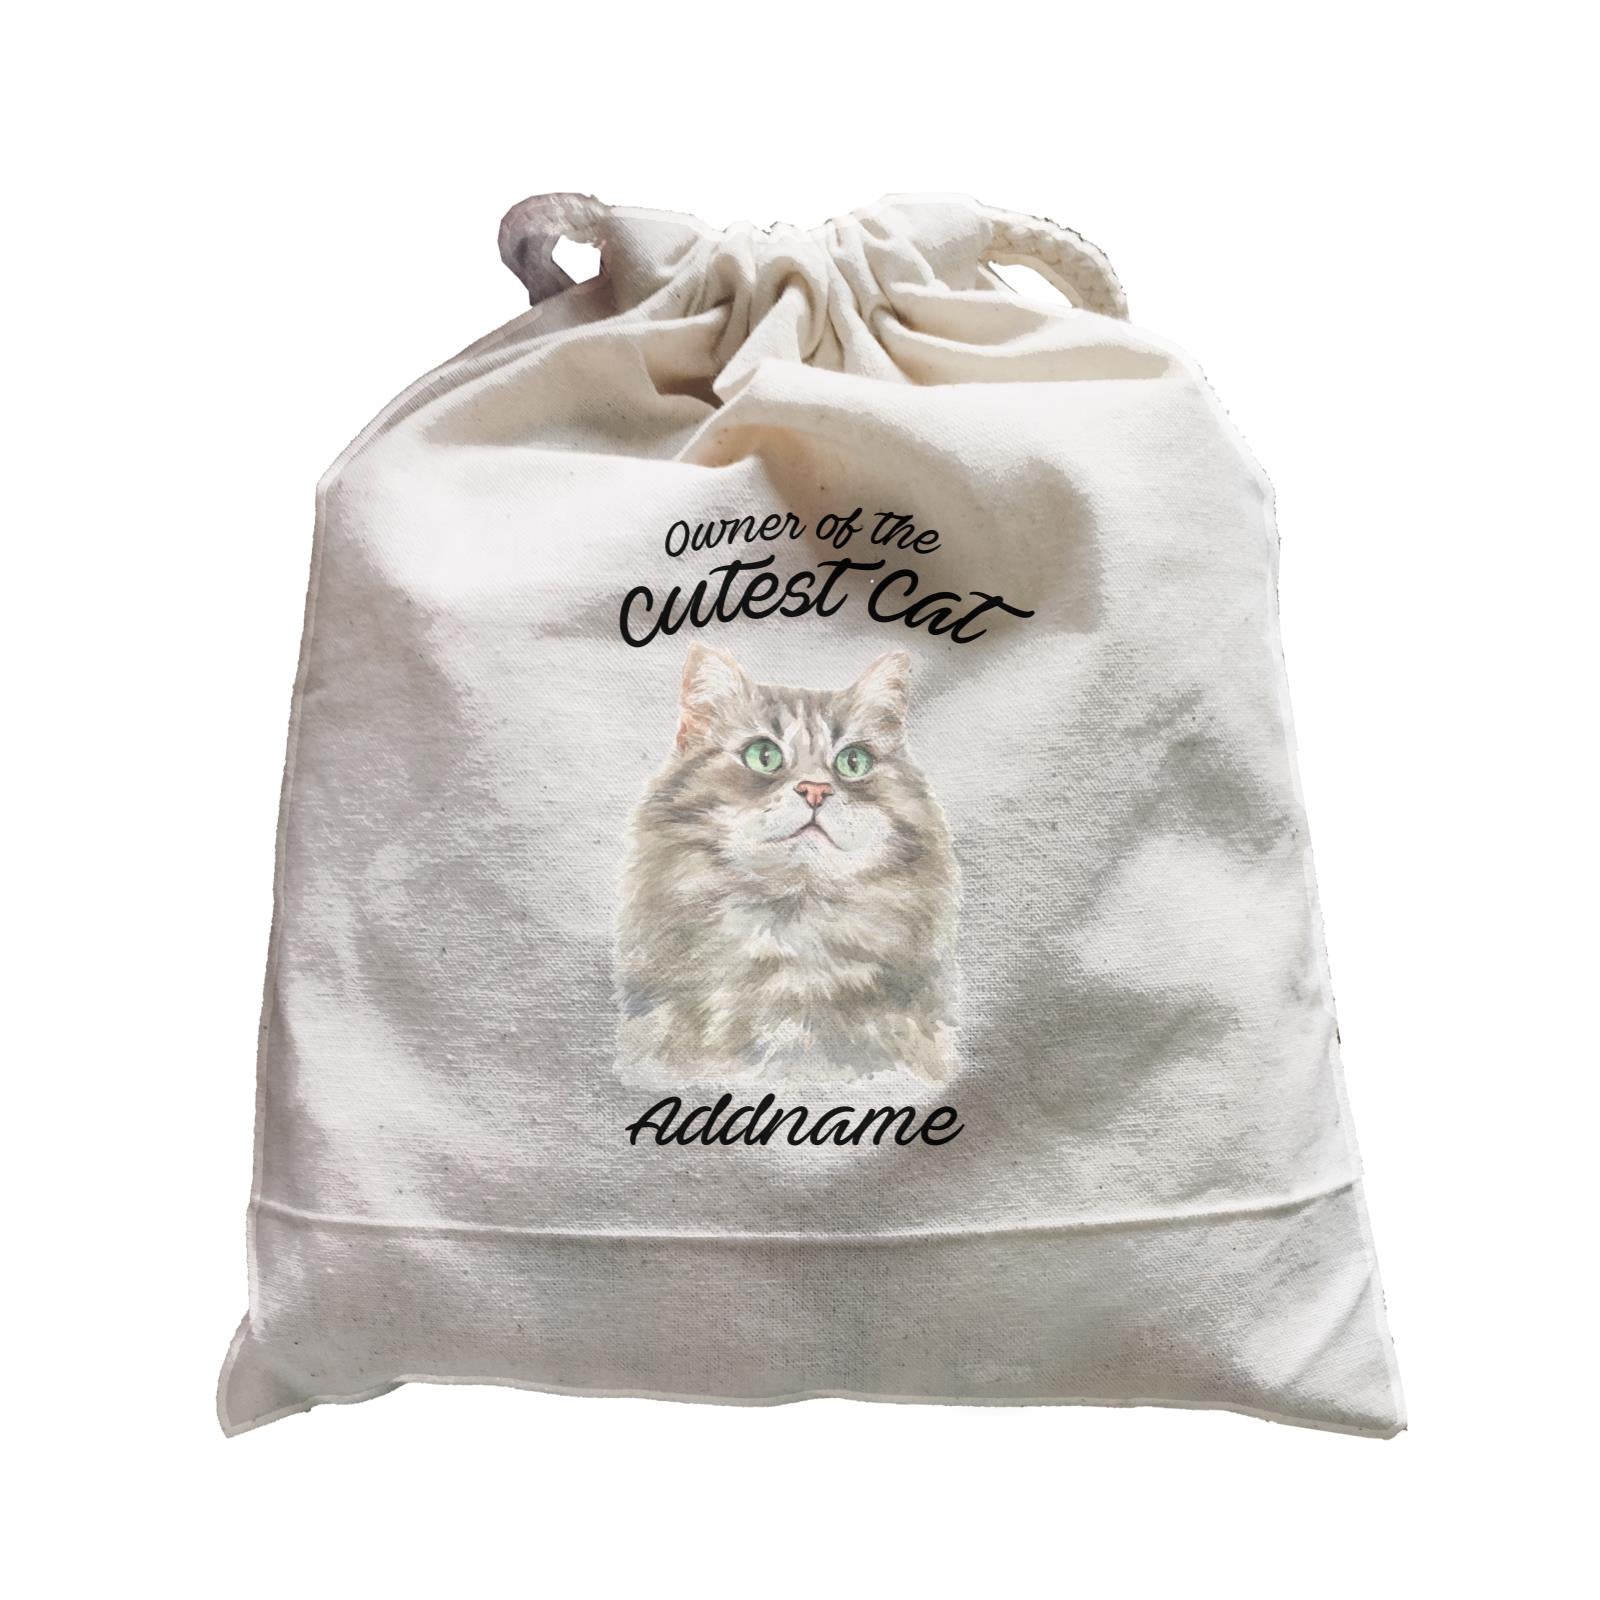 Watercolor Owner Of The Cutest Cat Siberian Cat Grey Addname Satchel